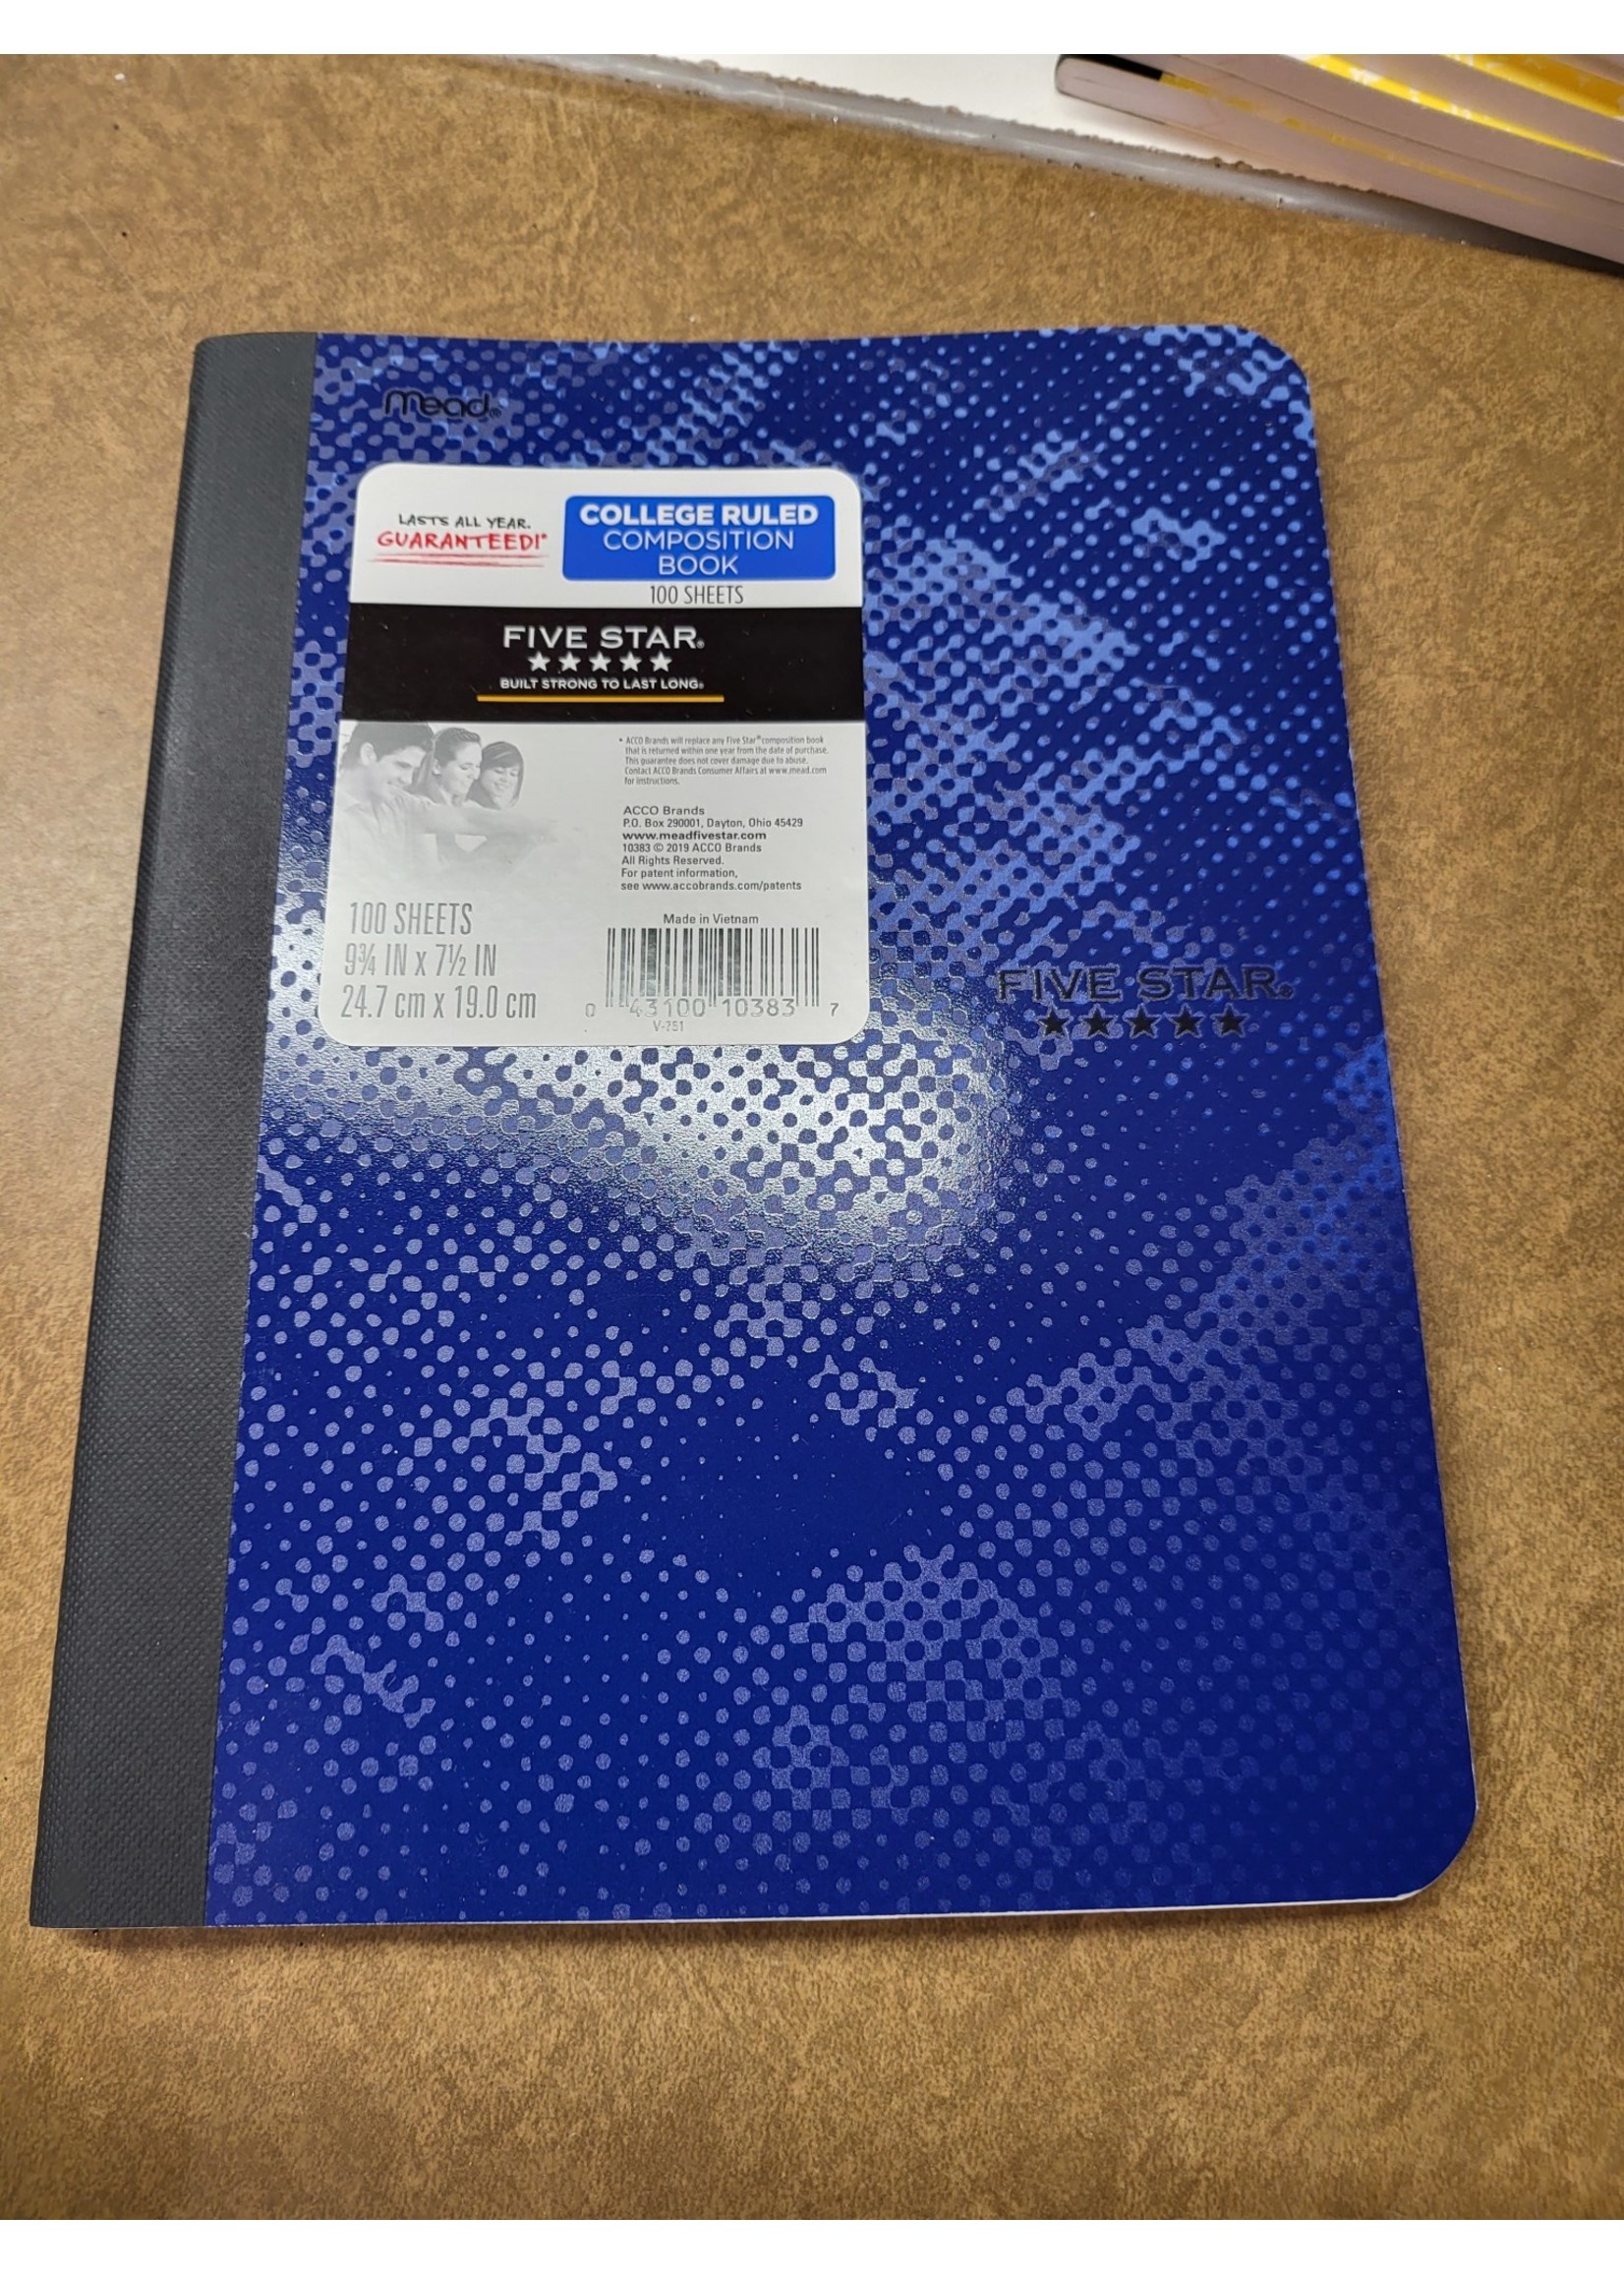 Five Star College Ruled Composition Notebook Blue